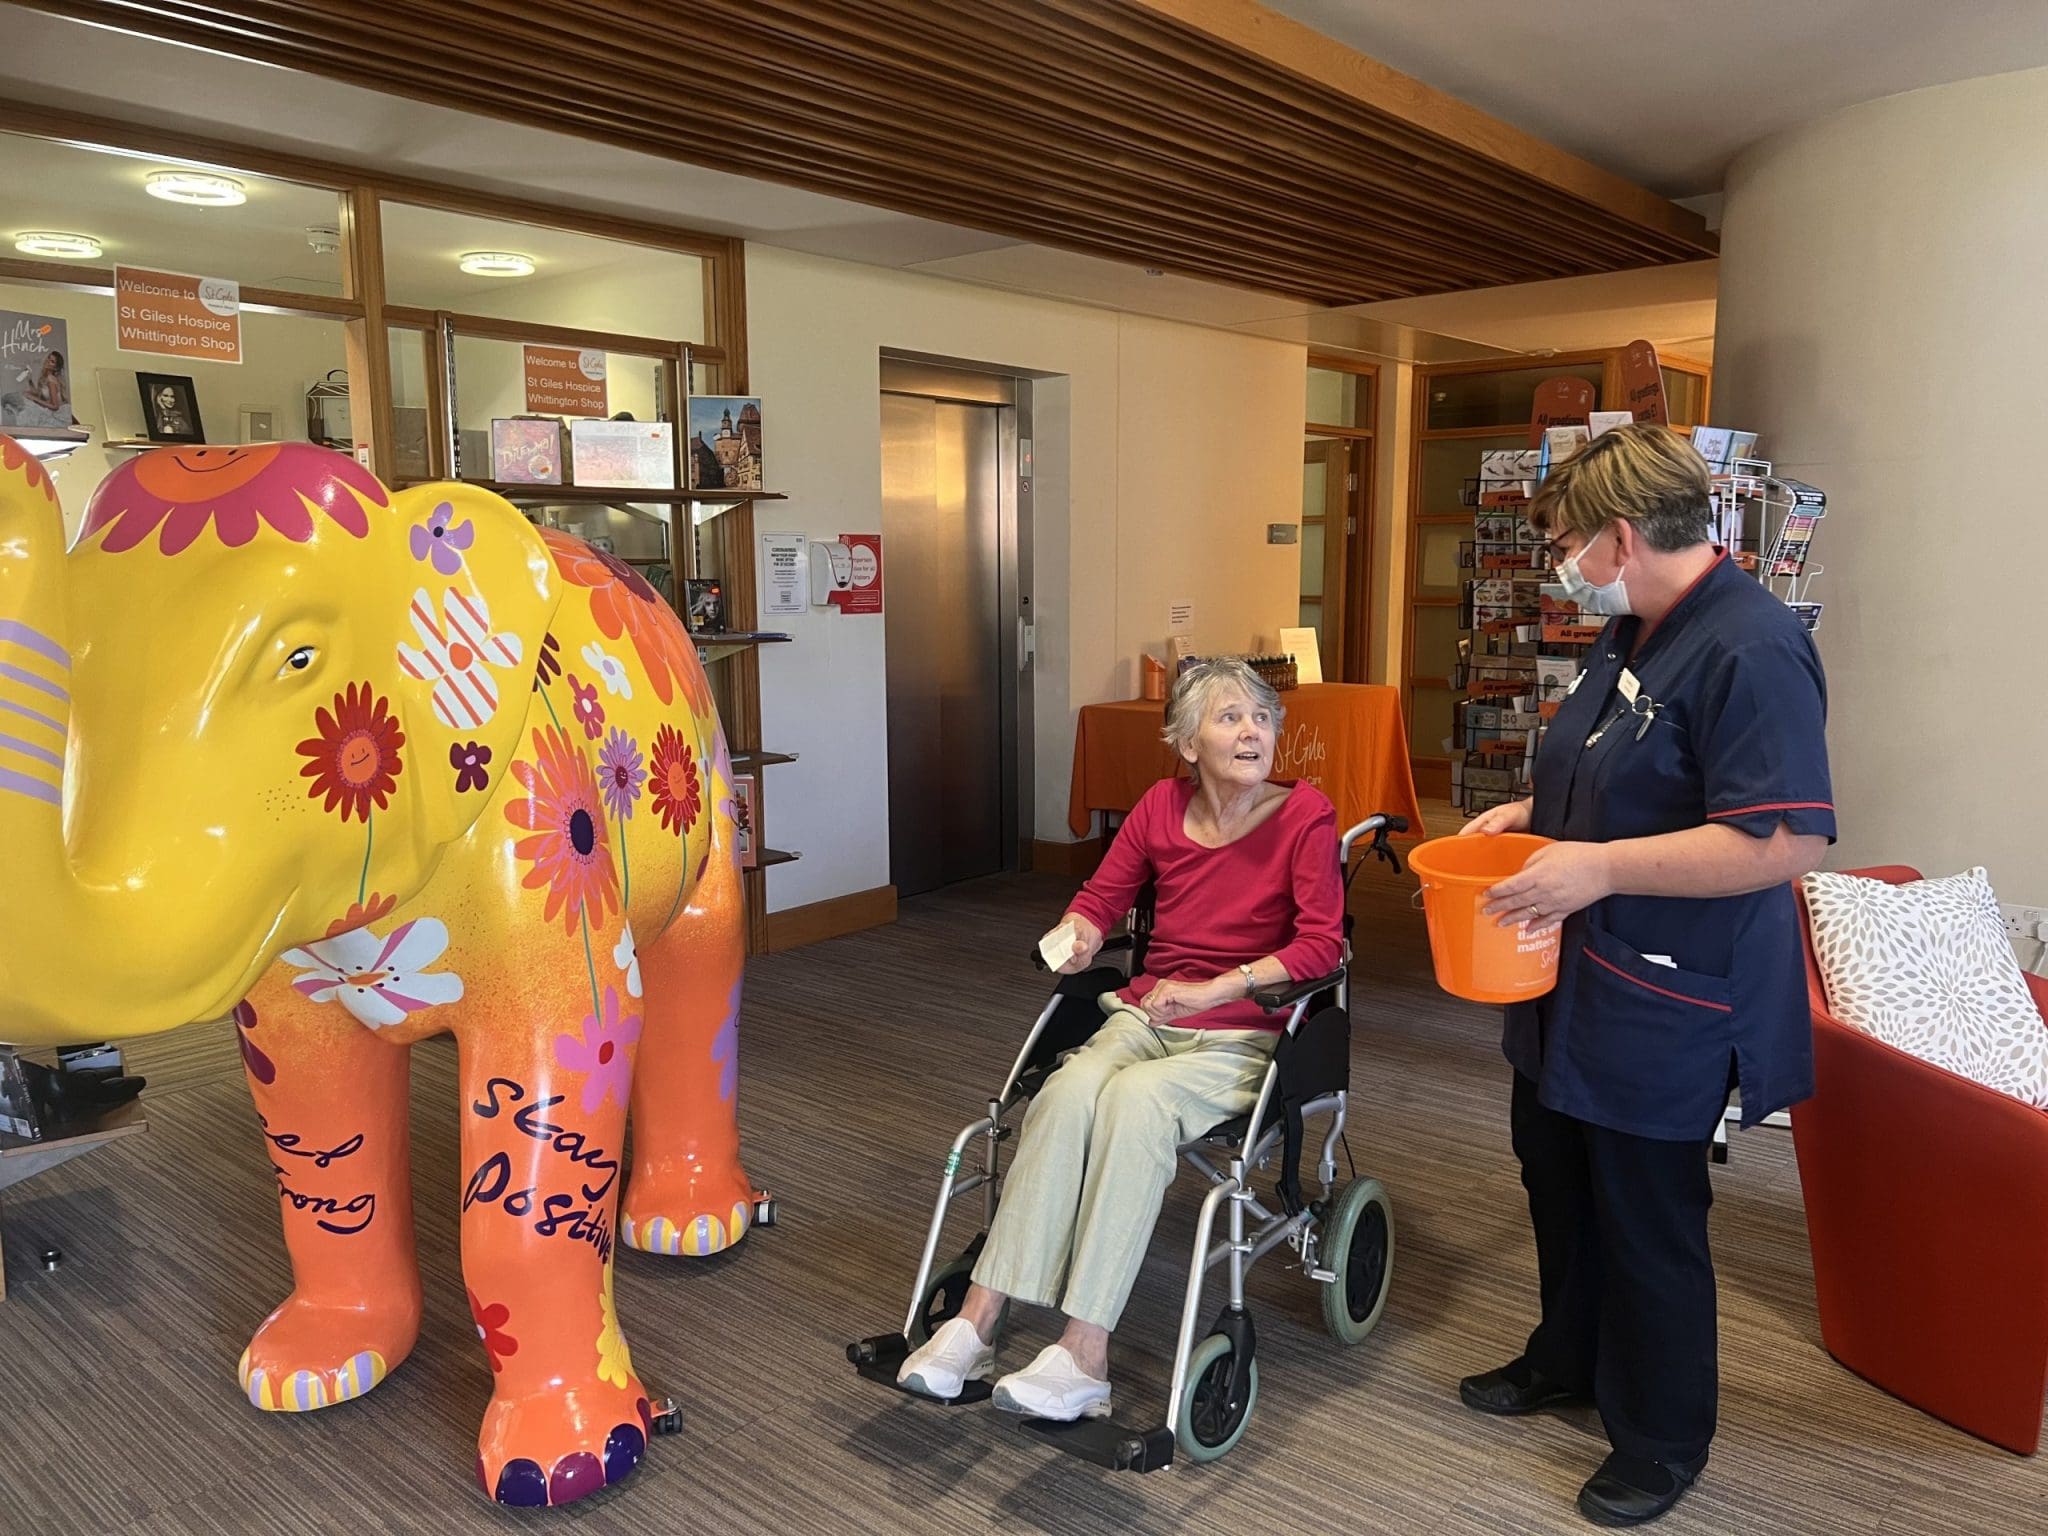 Hospice patient unveils name of elephant sculpture ahead of World Elephant Day 2022